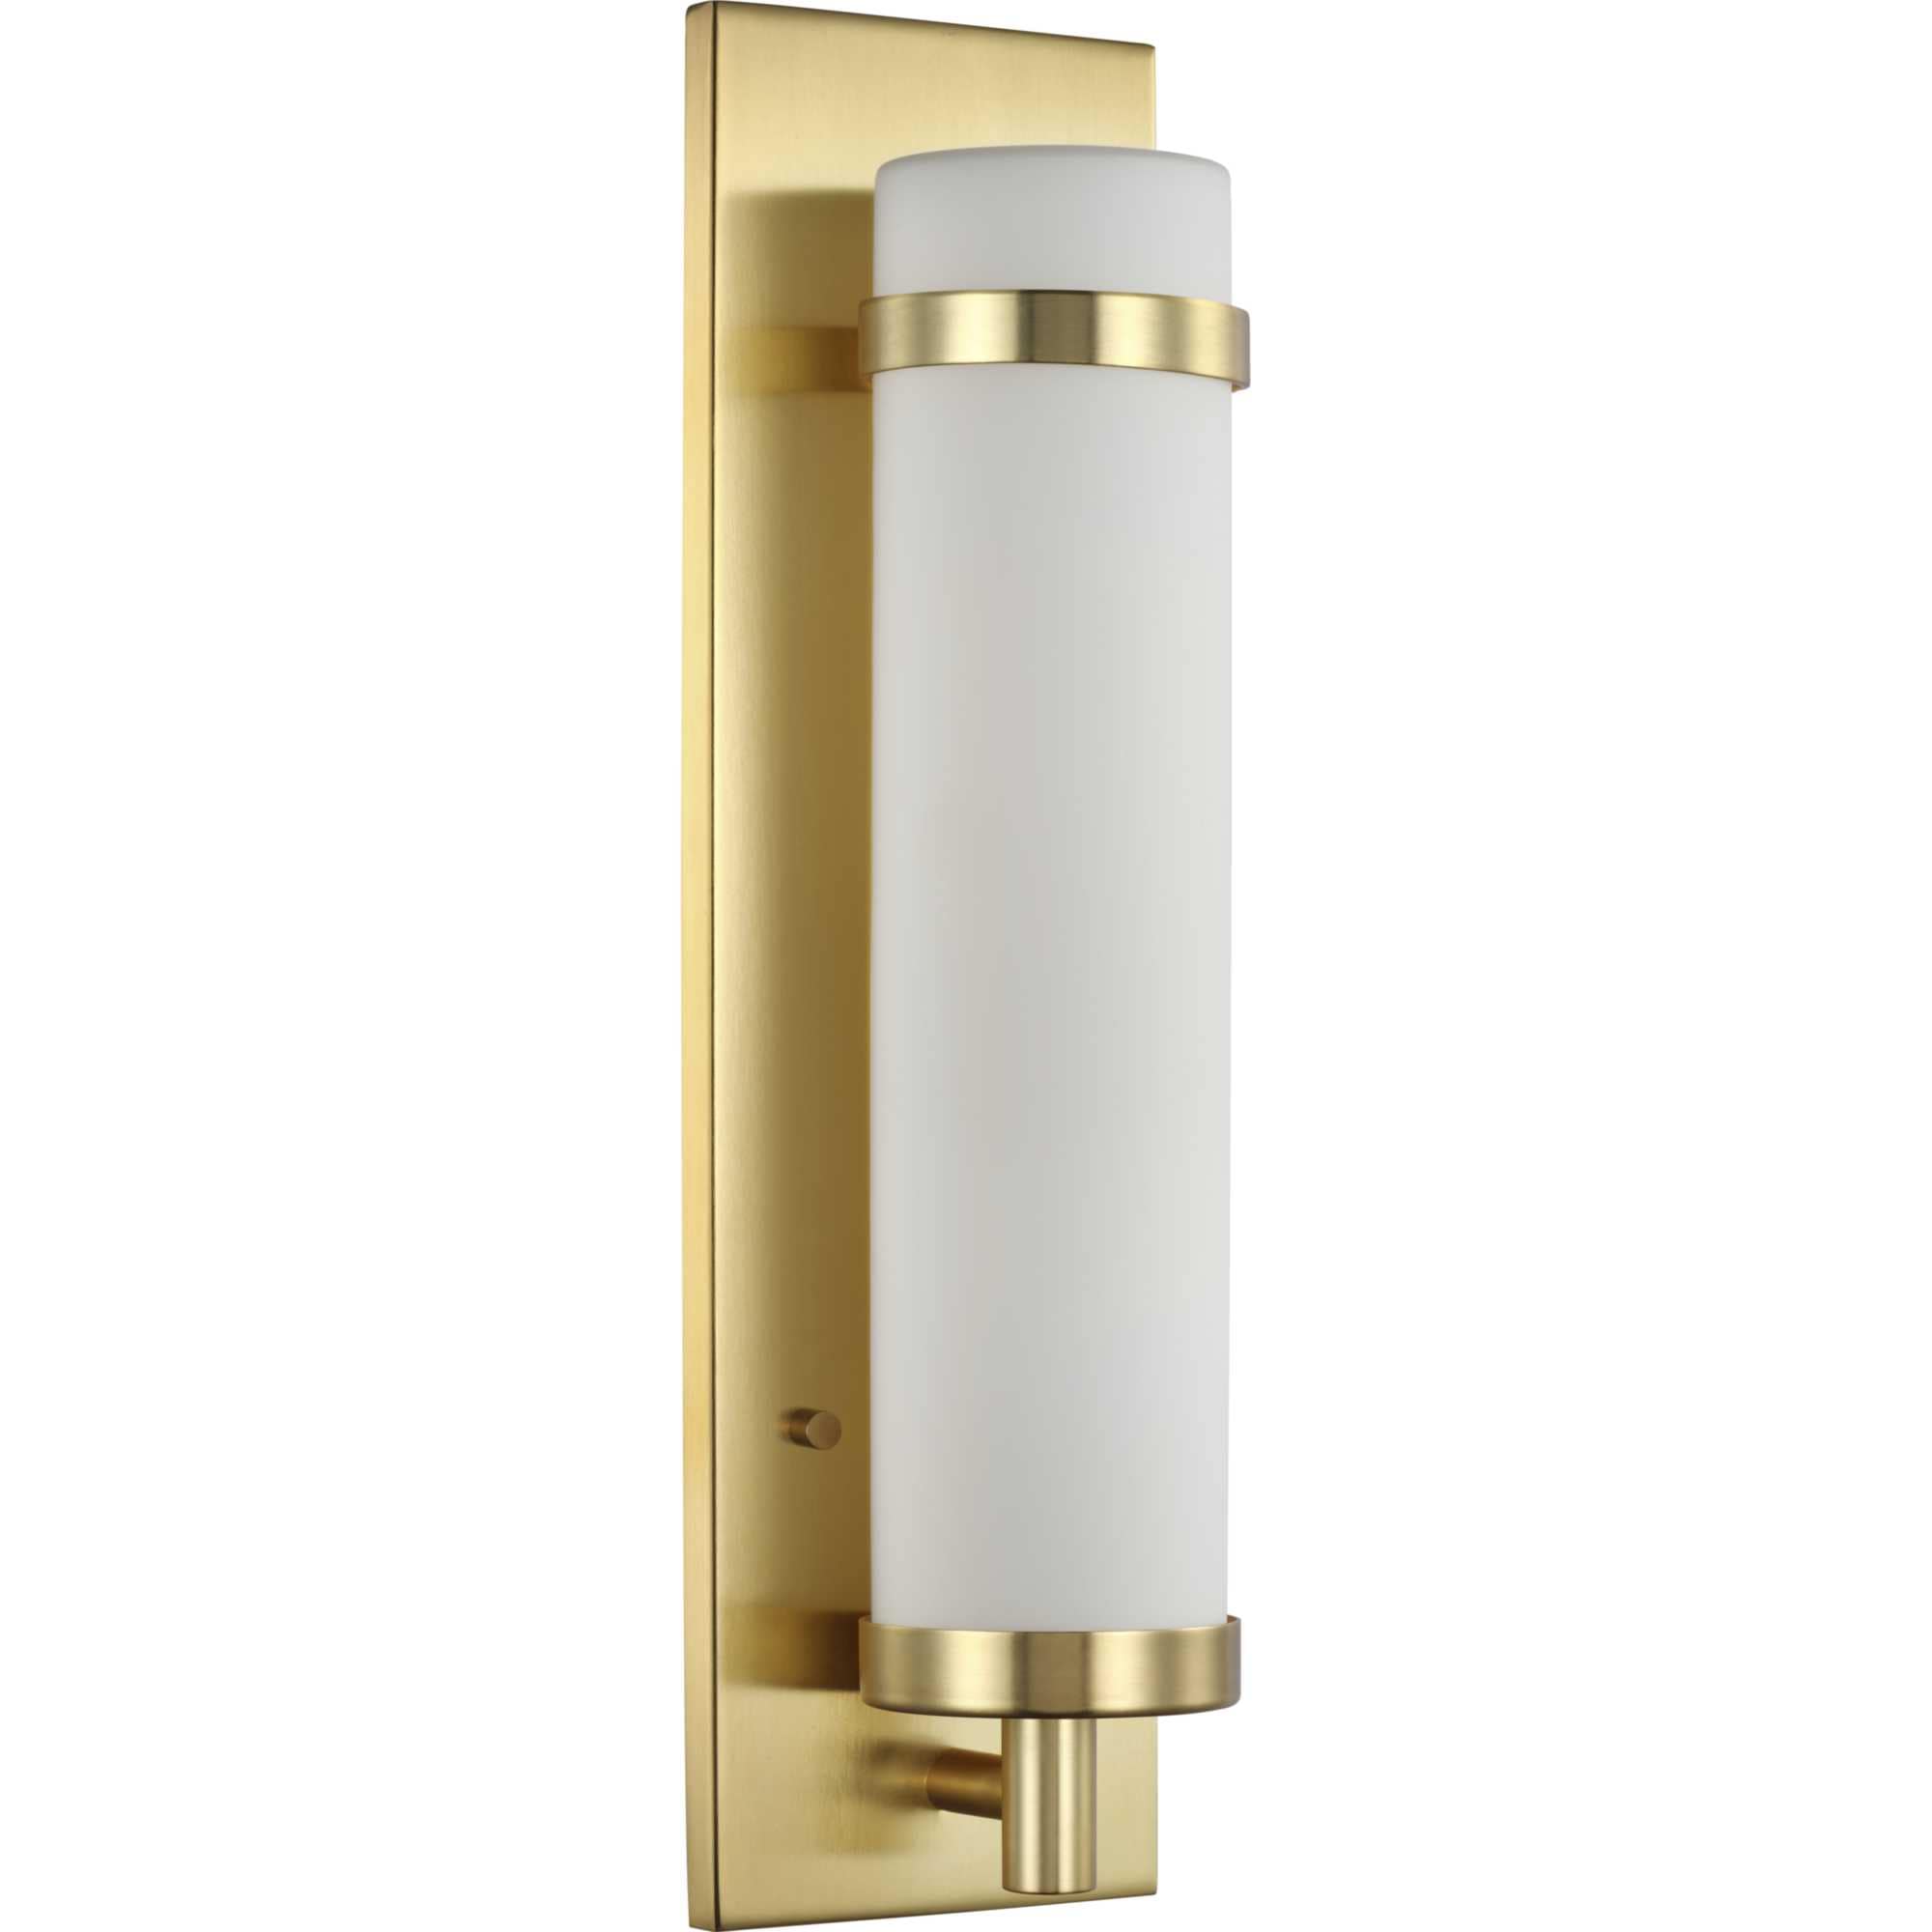 Brass Wall Sconces at